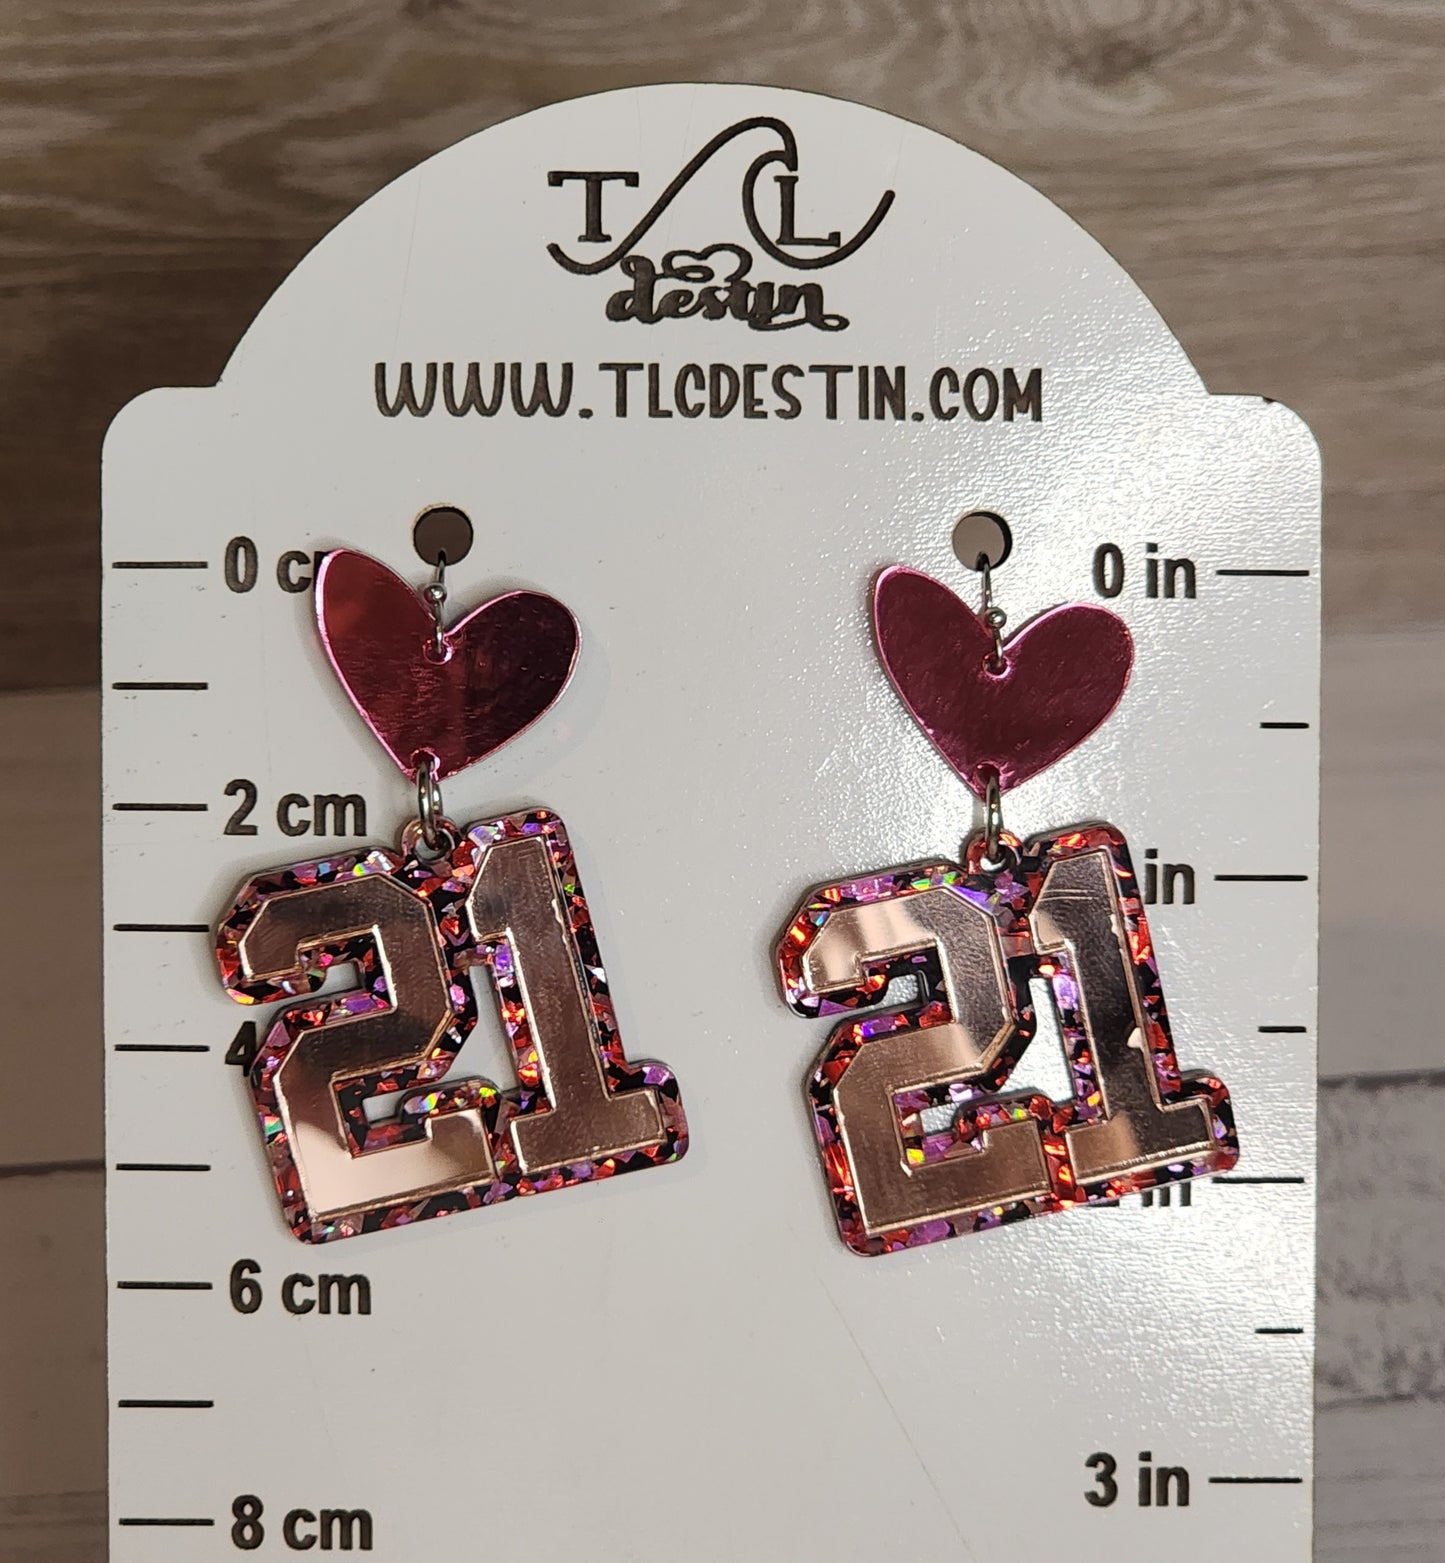 Mirrored acrylic laser cut heart in a deep pink paired with a light mirrored acrylic 21 inlayed into a stunning glitter acrylic. These are absolutly perfect for that 21 birthday party. You only turn 21 once. Approximately 3 inches in length but lightweight.